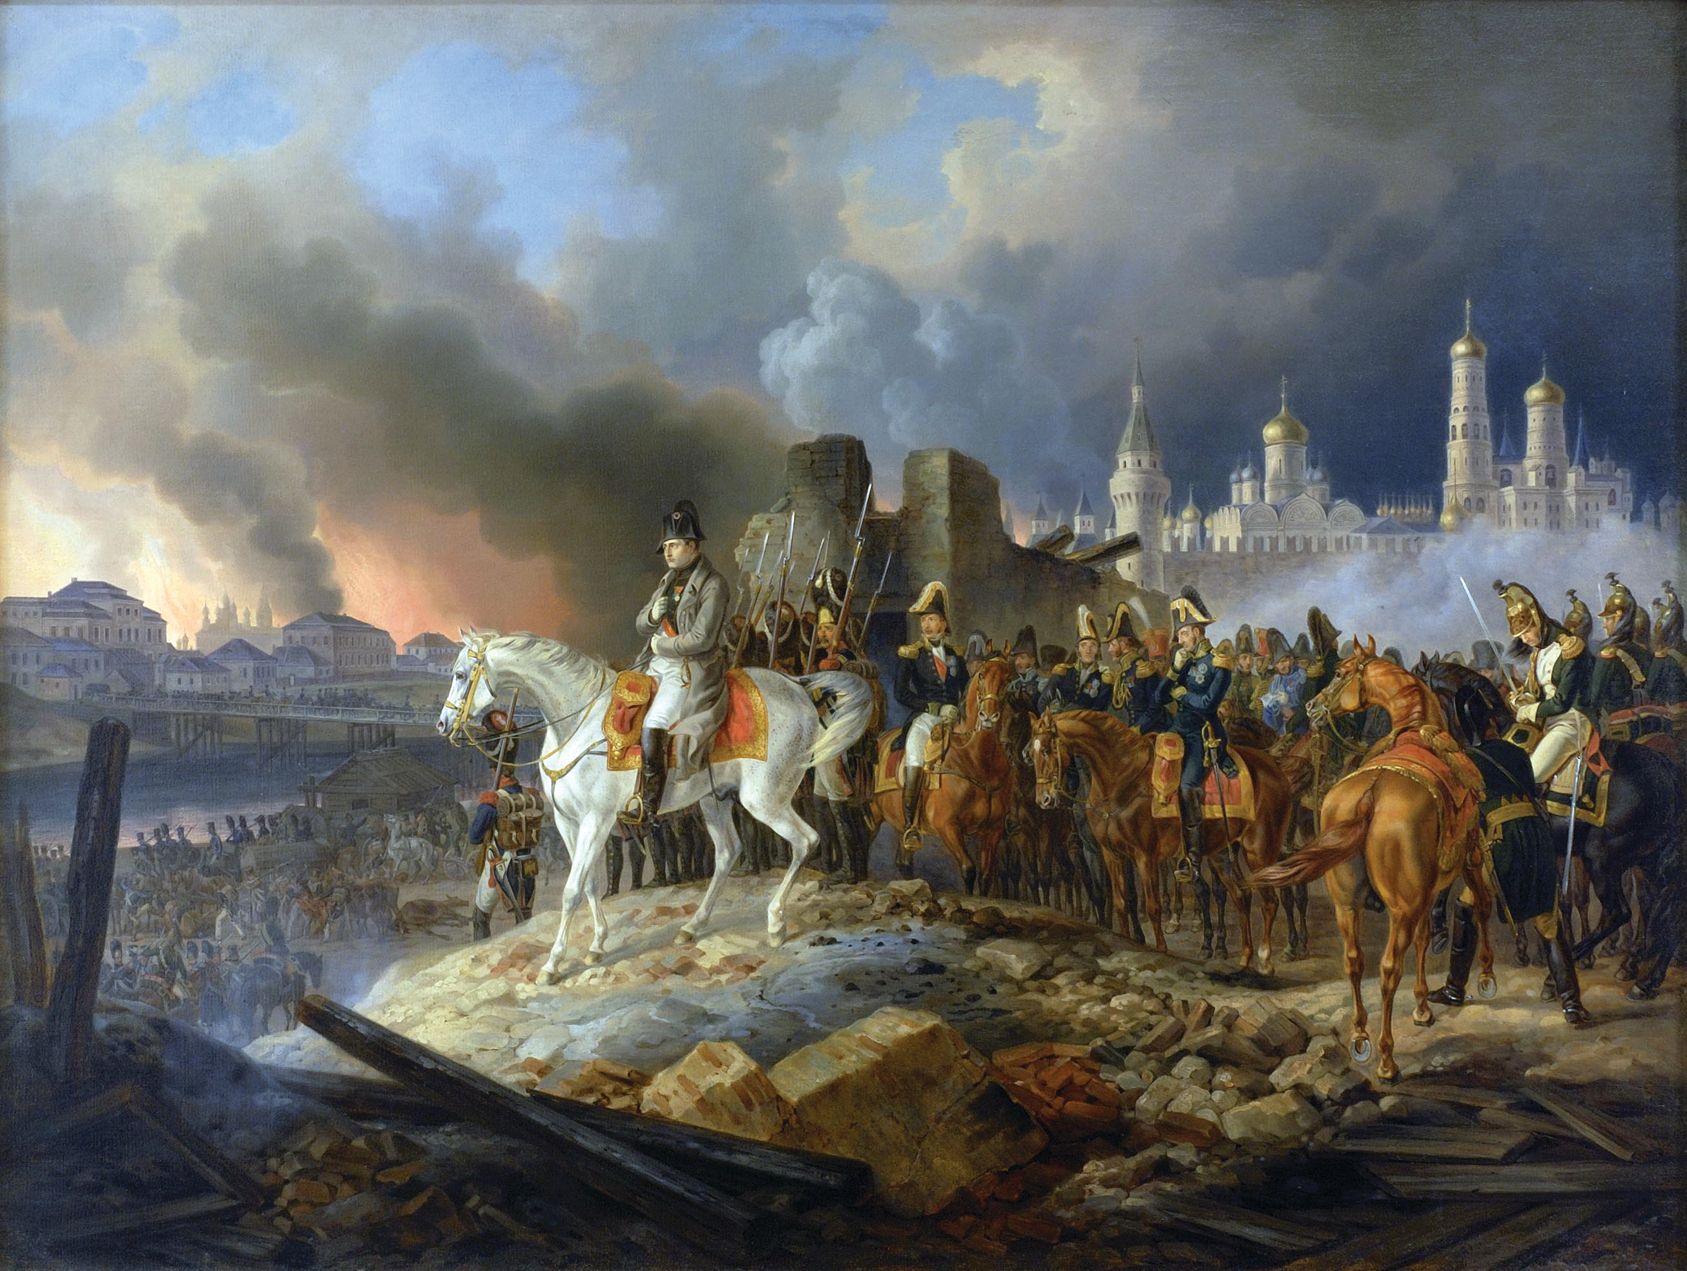 Napoleon arrives in Moscow to find it aflame and bereft of supplies. He failed to destroy the Russian army and had greatly underestimated Tsar Alexander’s political resolve.